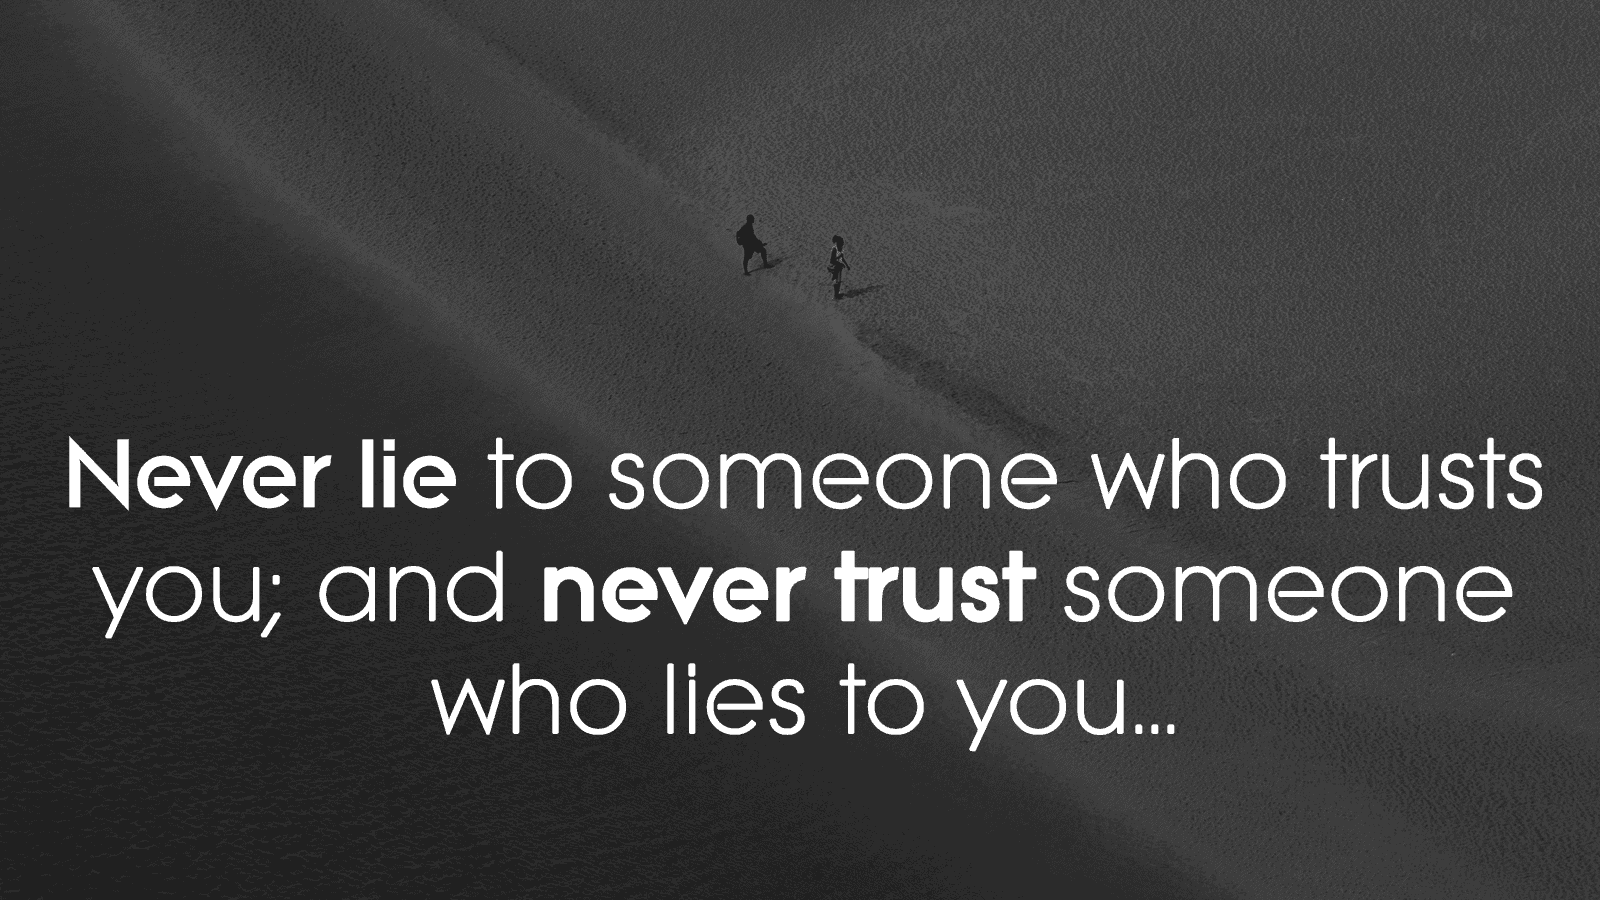 Never lie to the person you love. it's not worth it and they don't